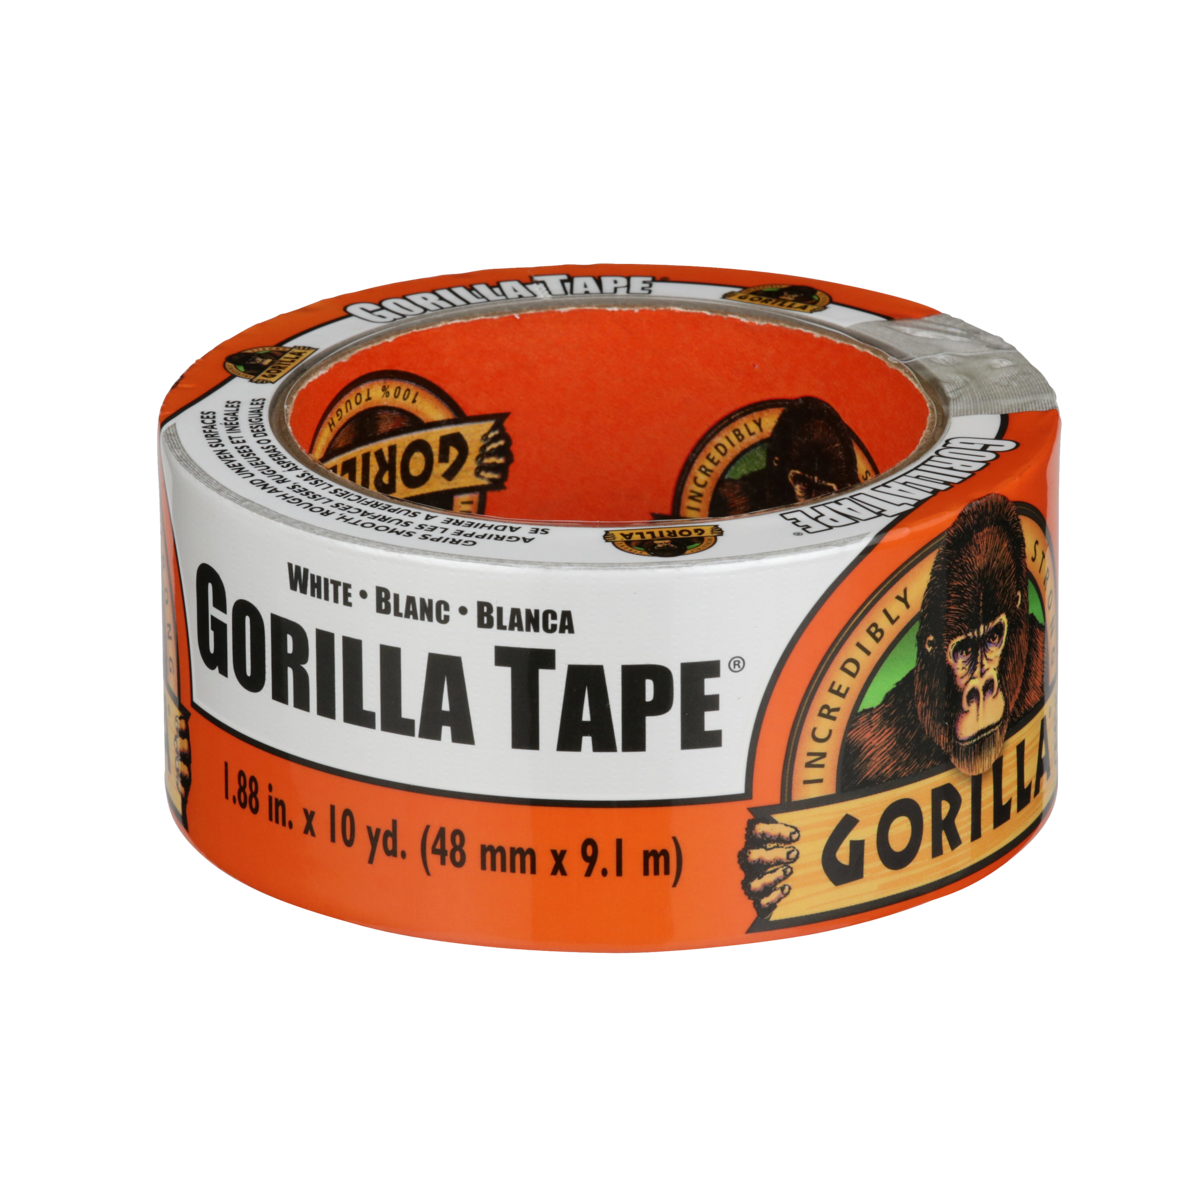 Gorilla Tape, White Duct Tape, 1.88 x 10 yd, White, Pack of 3